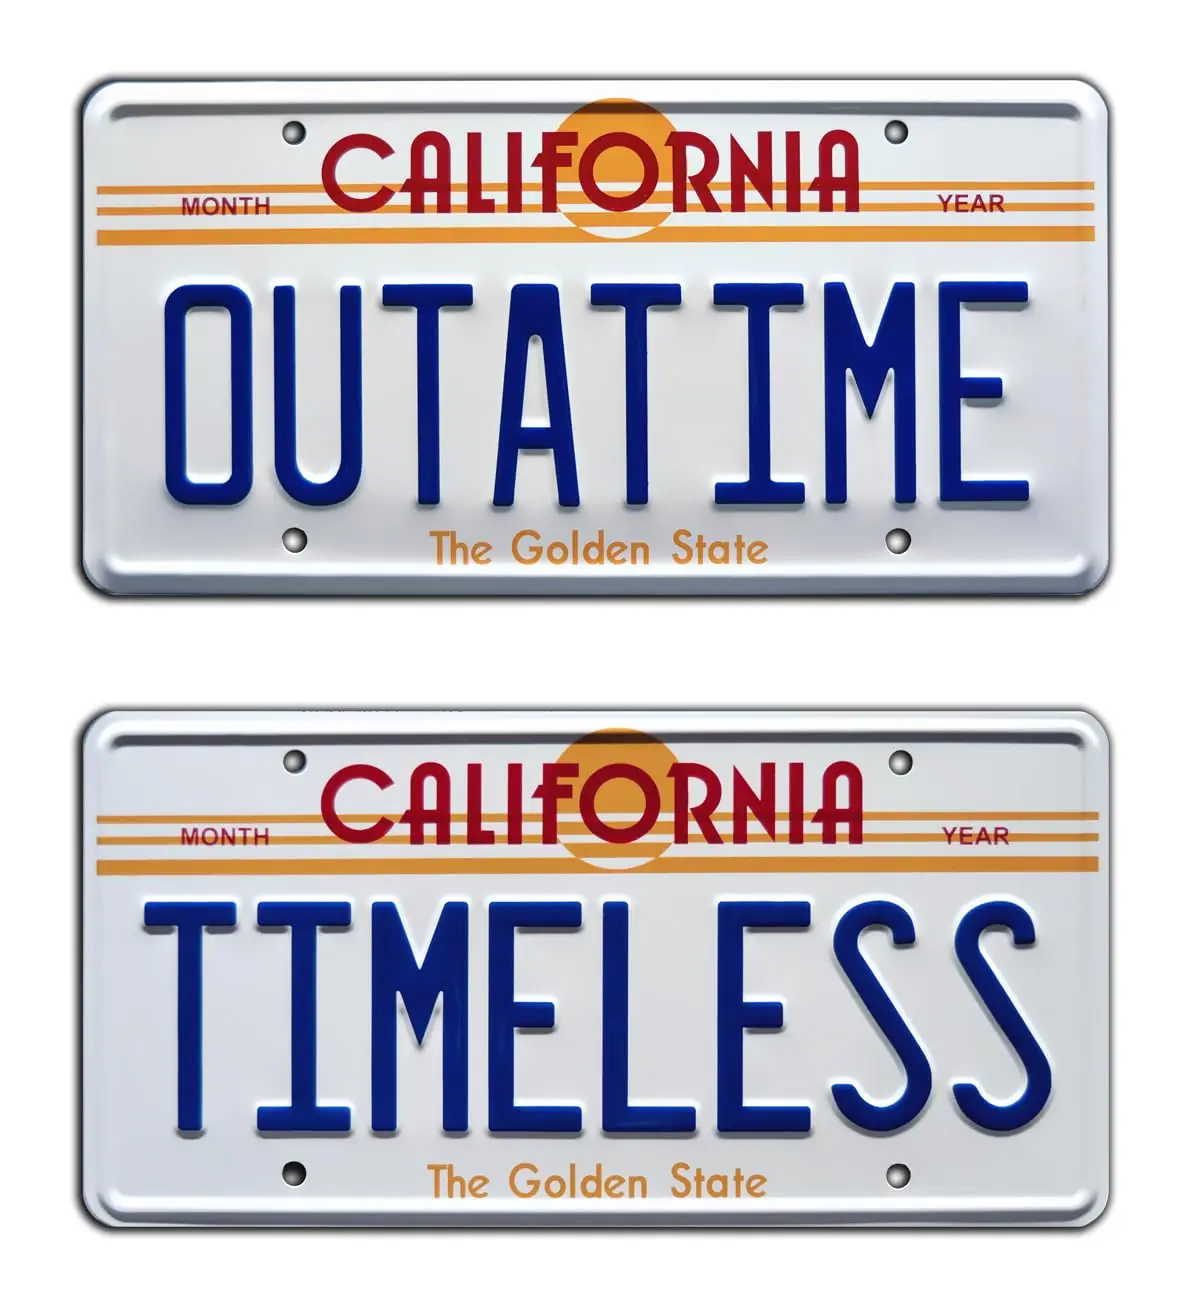 

Back to the Future | OUTATIME + TIMELESS | Metal Stamped License Plates - Metal License Plate License Plate Frames